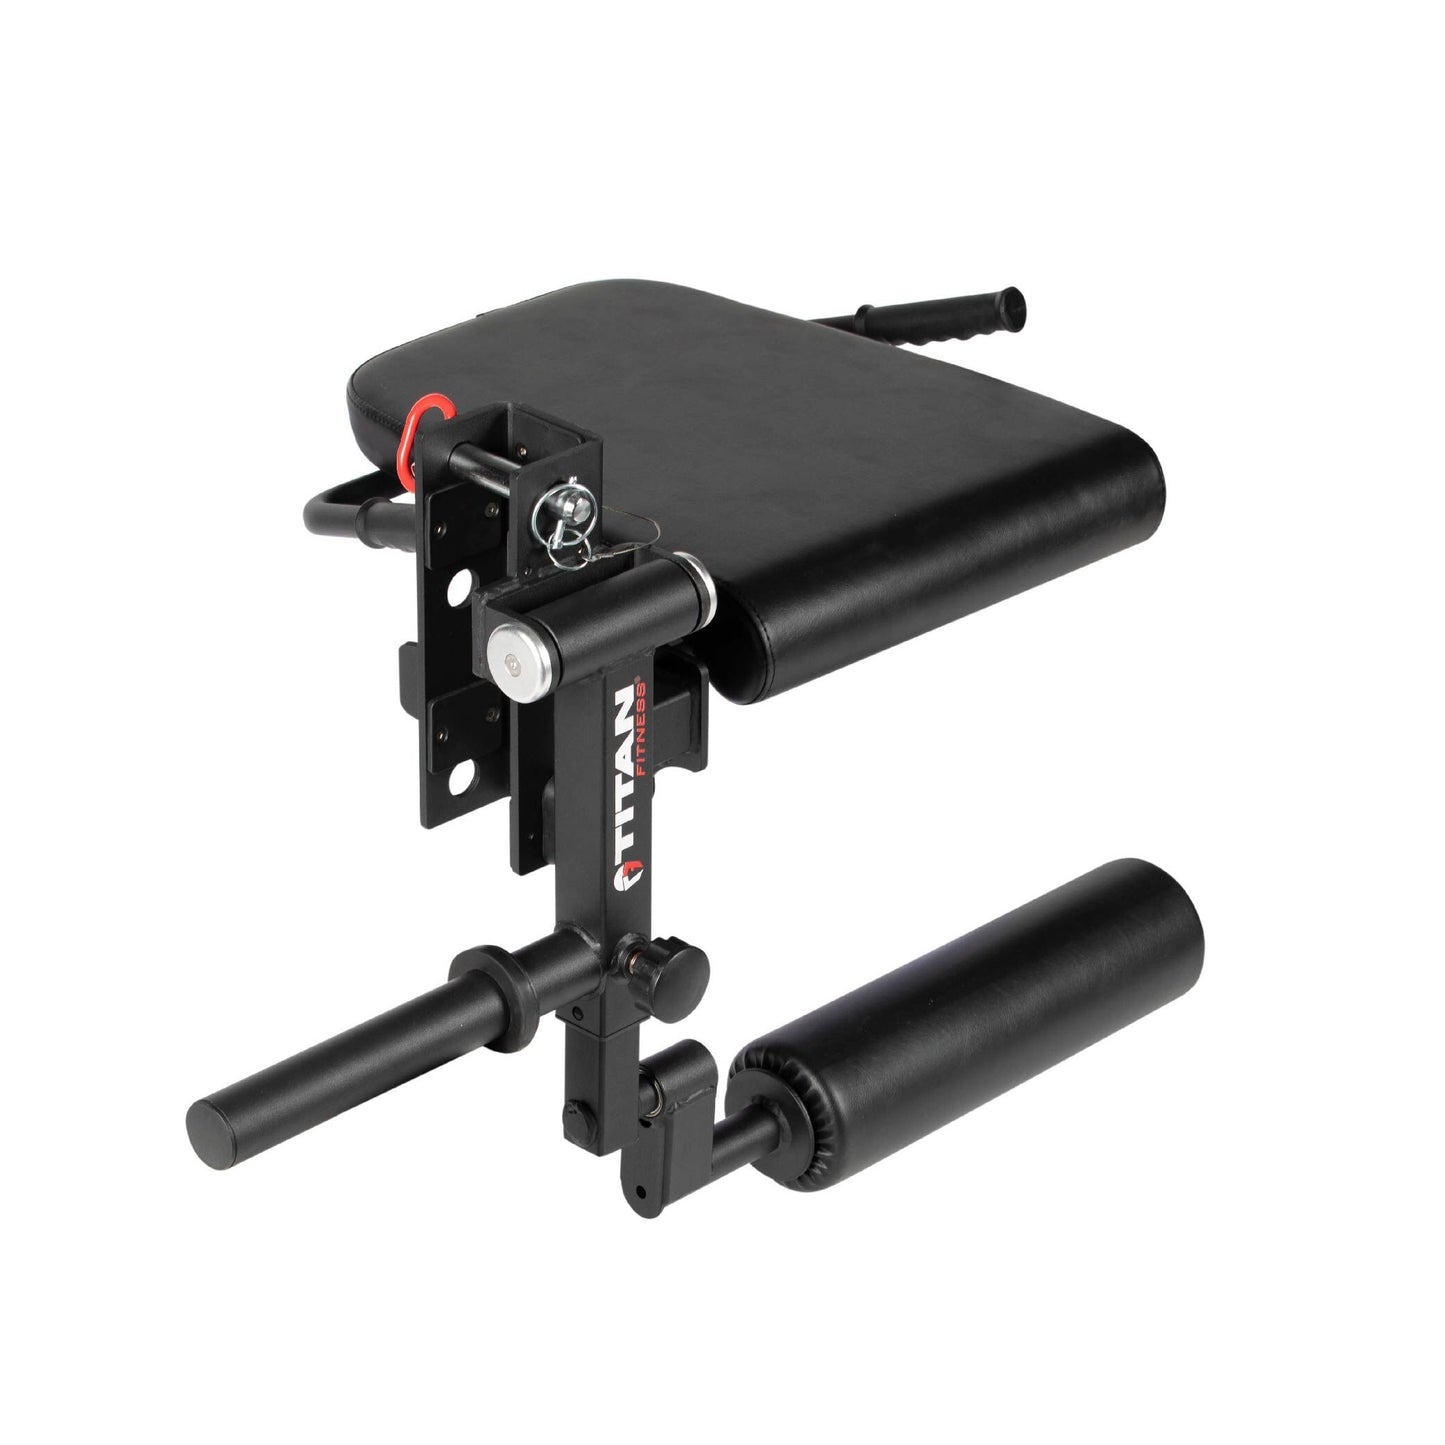 TITAN Series Rack Mounted Leg Curl and Extension - view 1